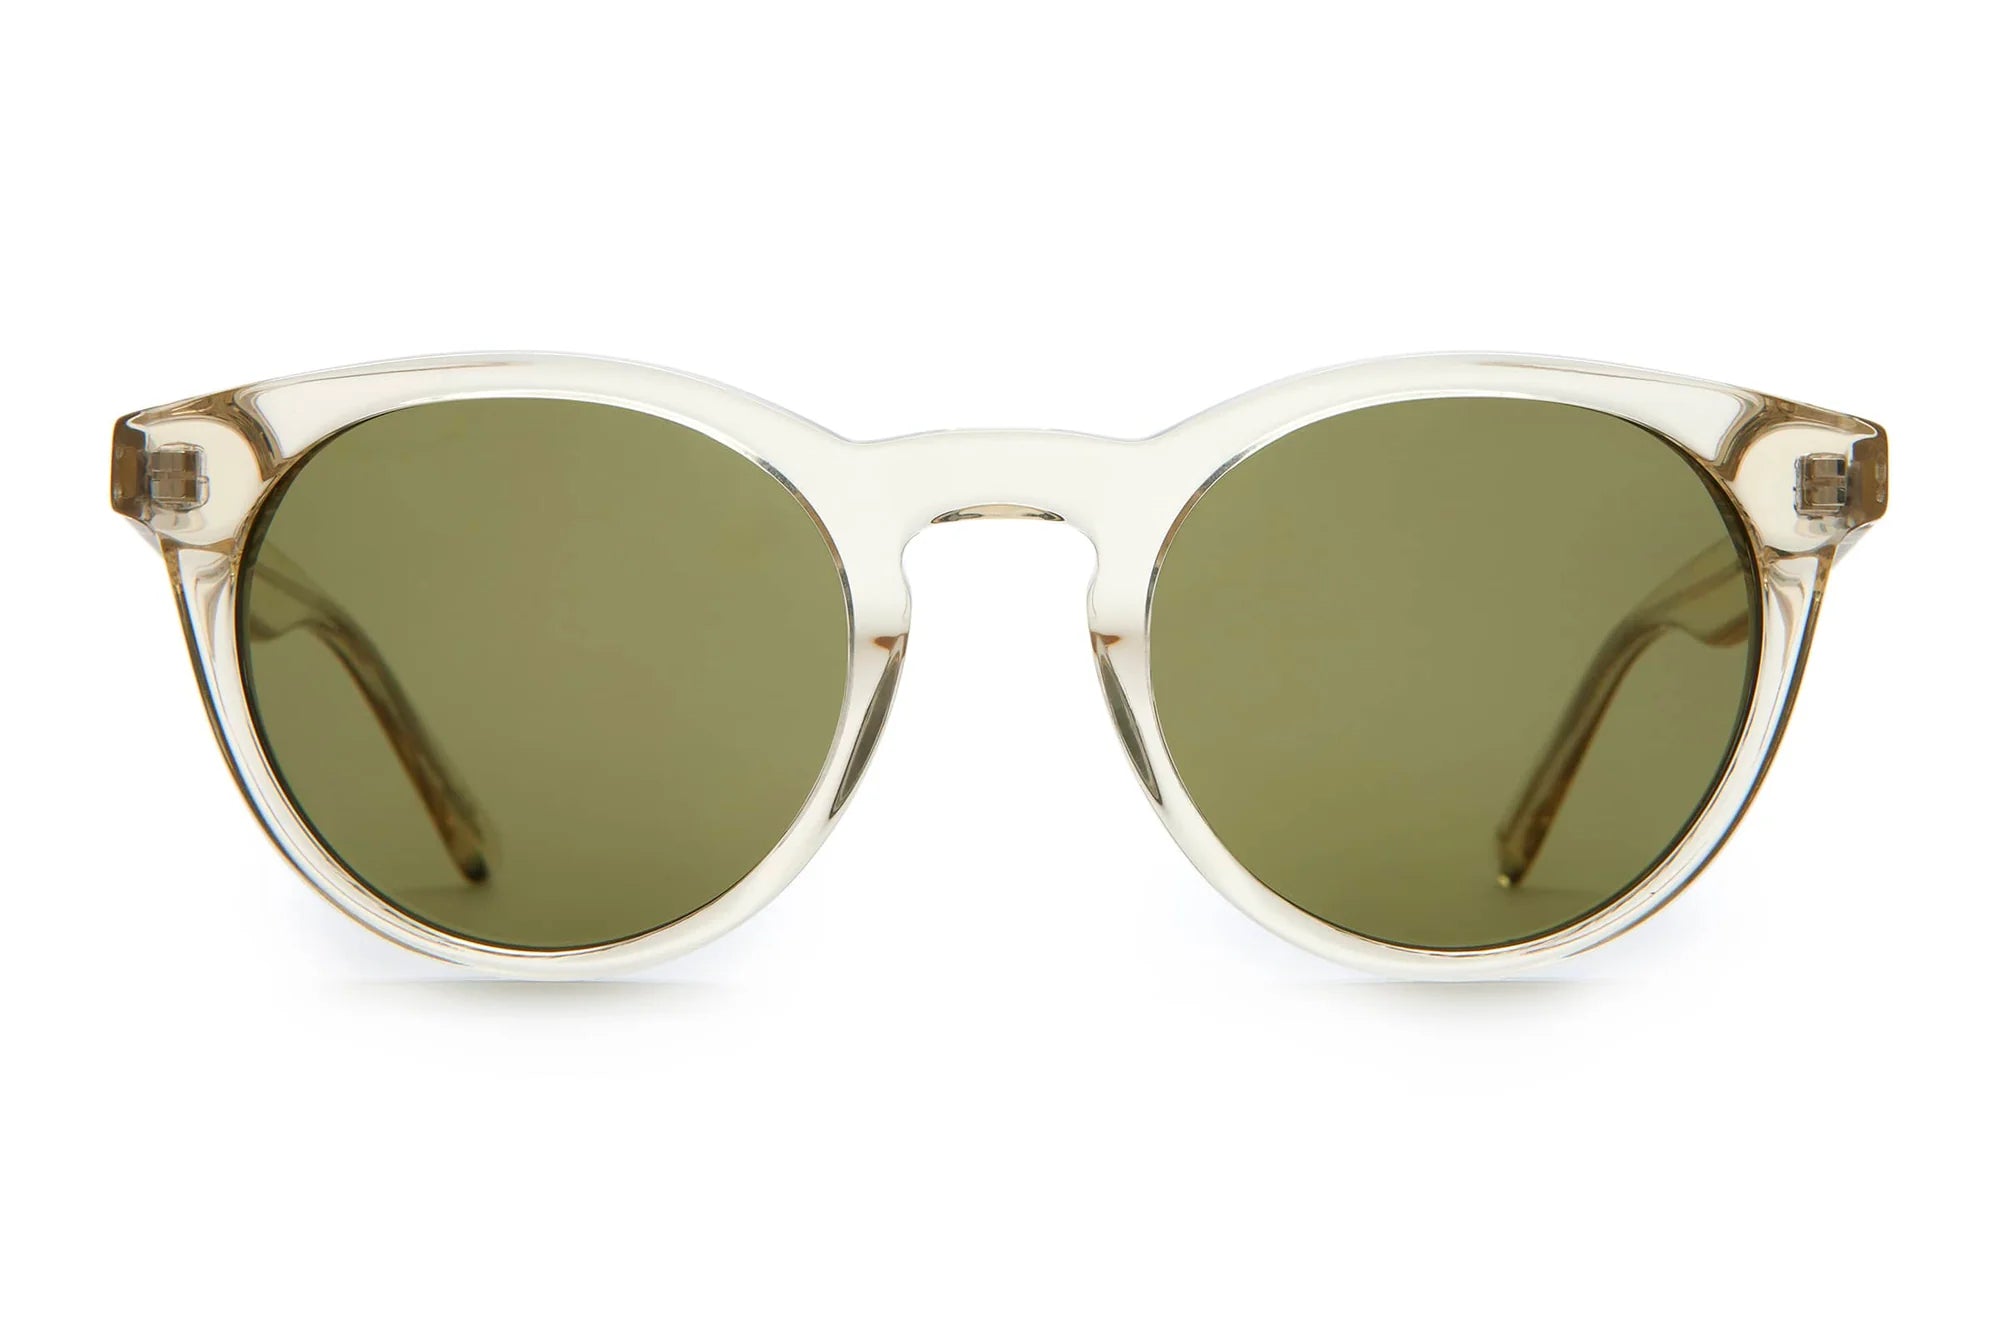 The Shake Appeal in Crystal Champagne Bio / Polarized Olive| Crap Eyewear